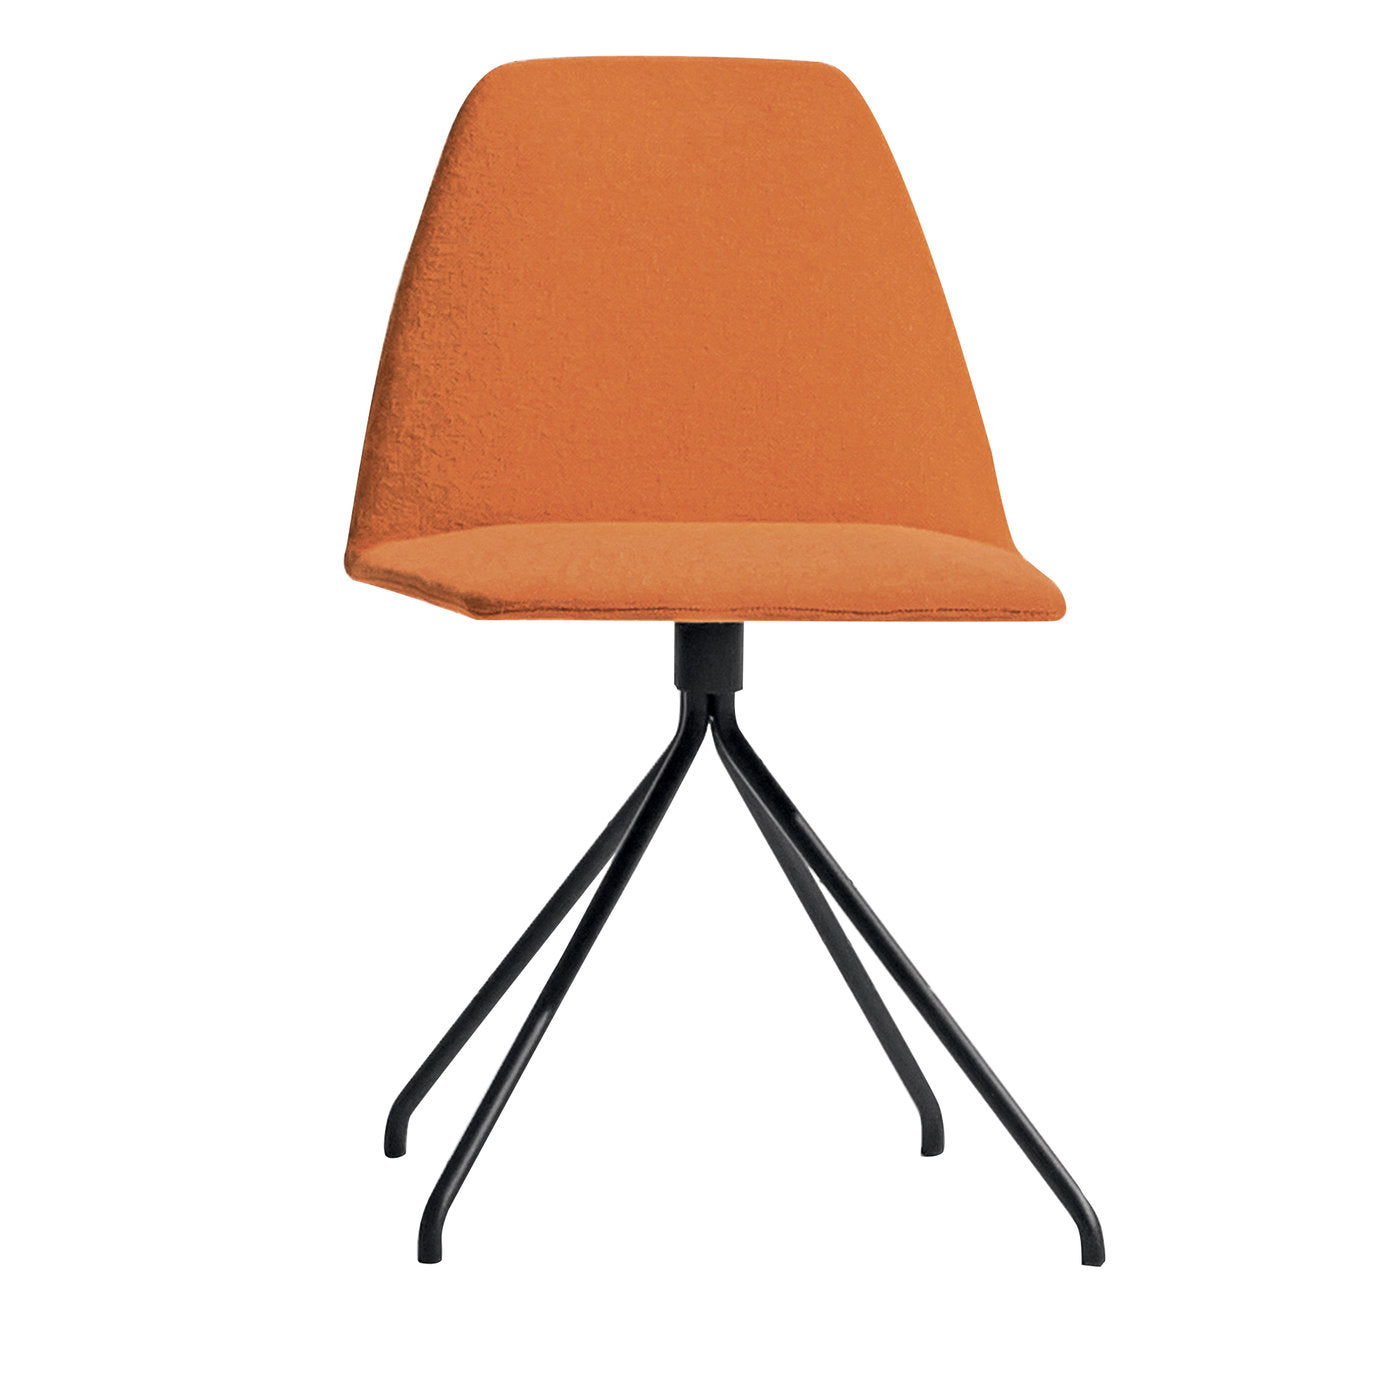 Sila Trestle Orange Upholstered Chair - Main view